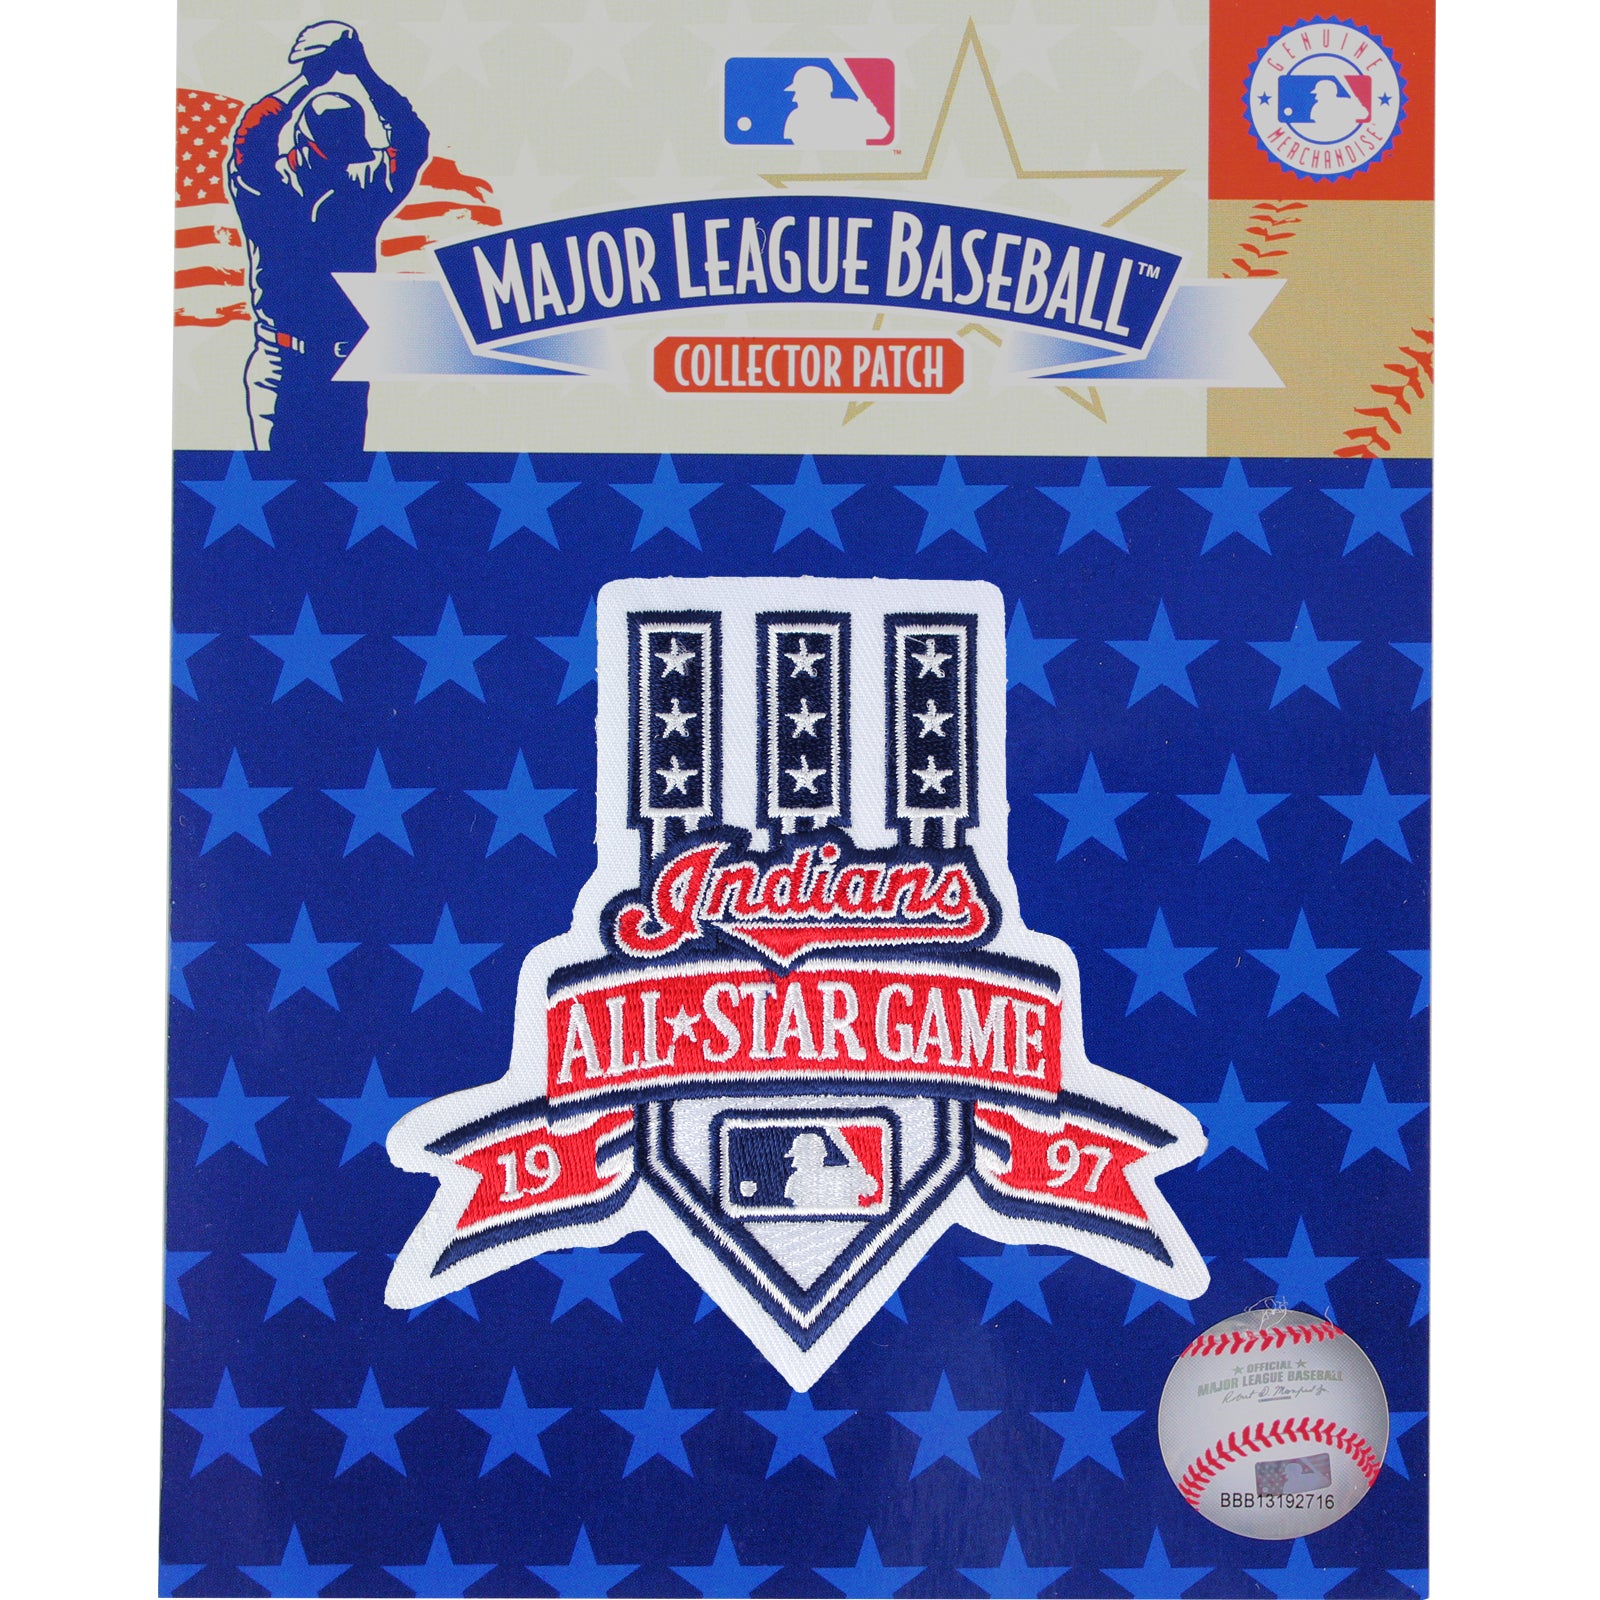 1997 MLB All Star Game Cleveland Indians Jersey Patch - Maker of Jacket